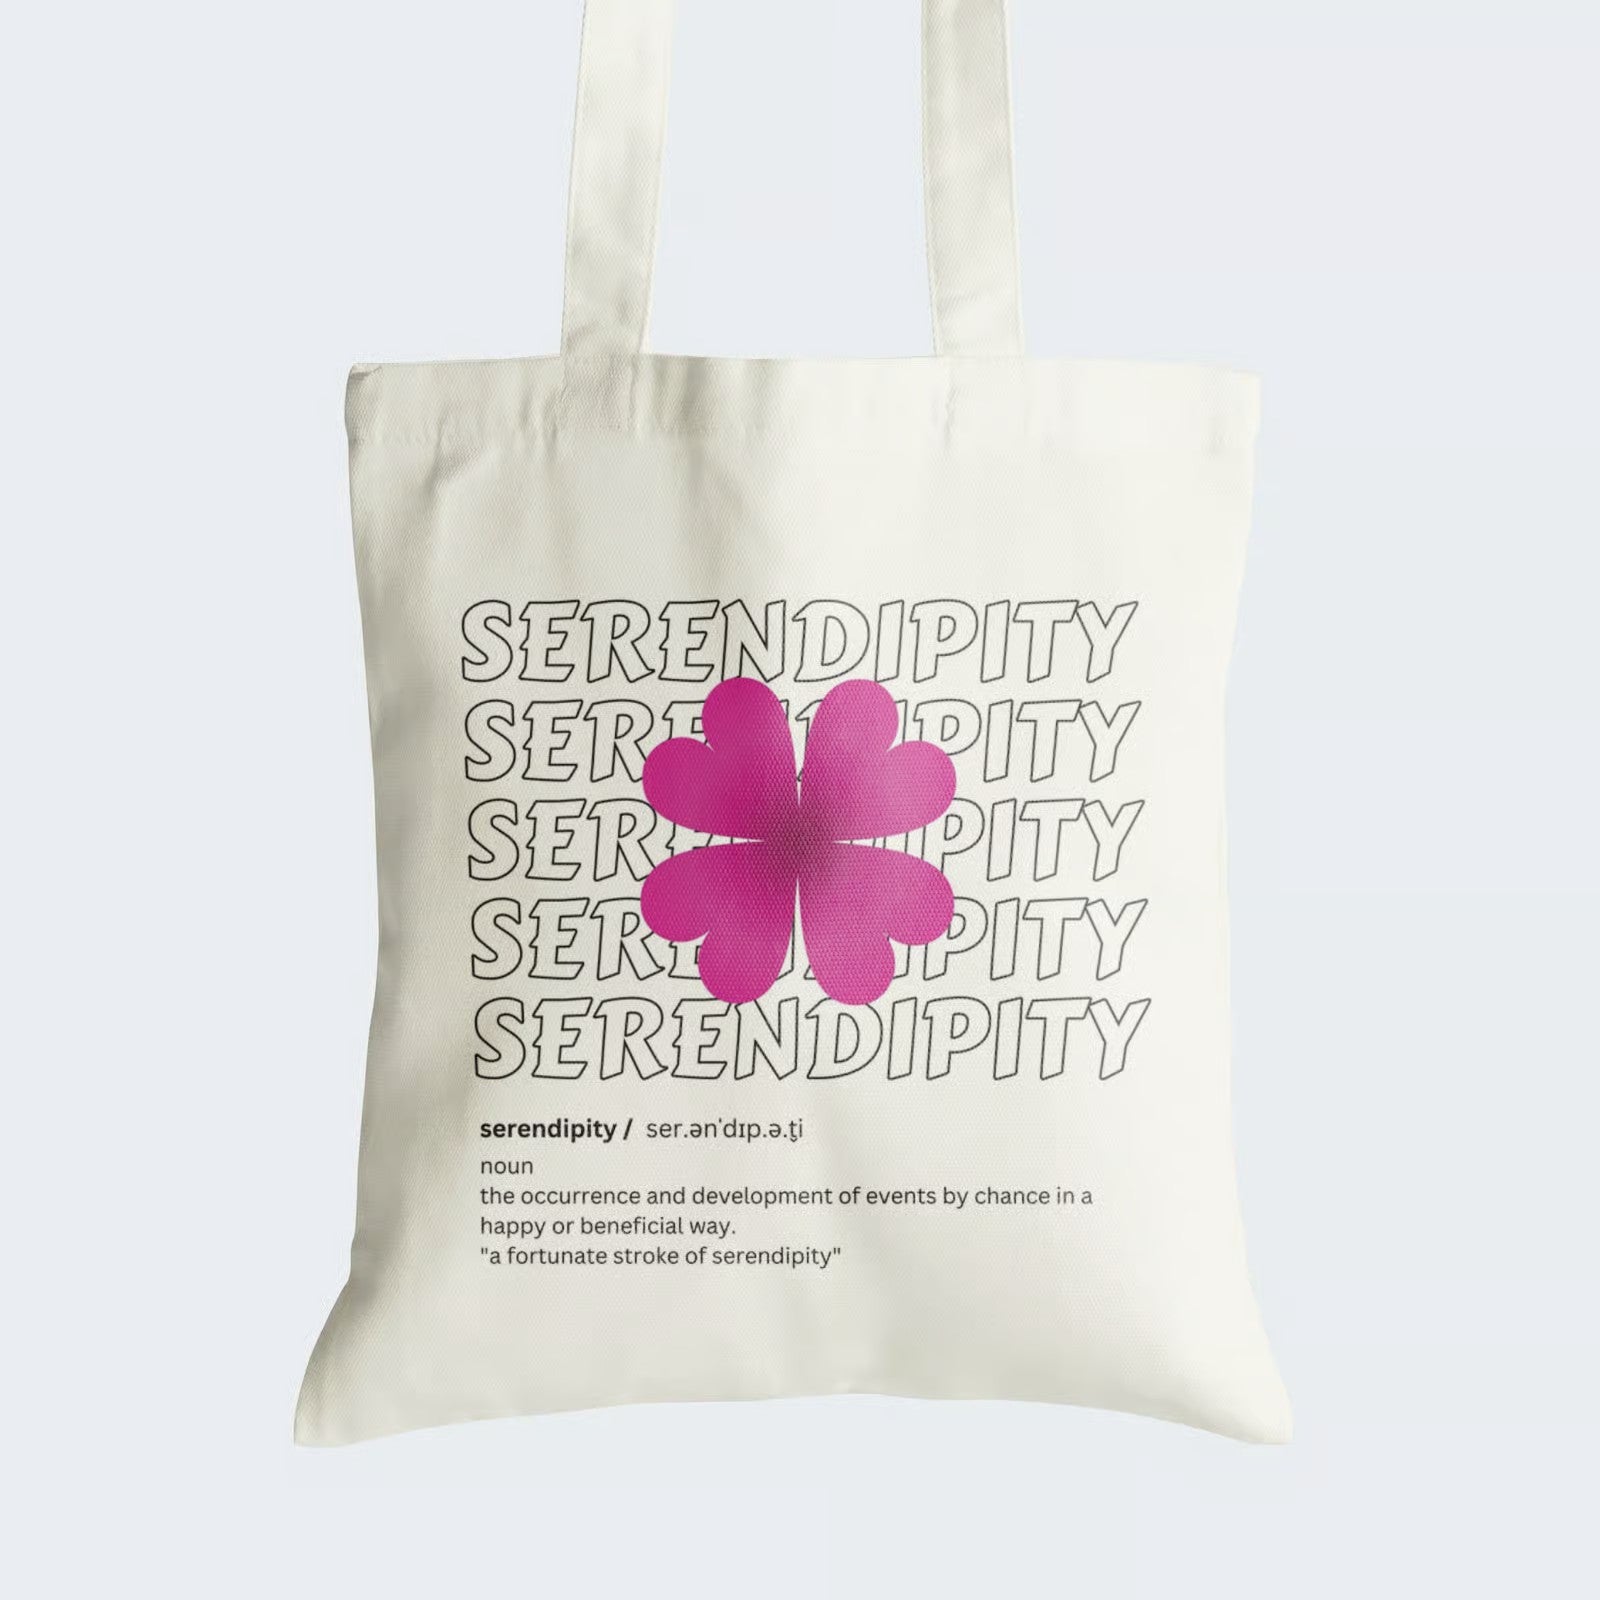 Elevate your style and celebrate serendipity with our "Serendipity Blossom" Cotton Canvas Tote Bag. This tote features "Serendipity" elegantly written five times, accompanied by a pink flower boasting heart-shaped petals. Beneath, discover a dictionary-like definition of "Serendipity," honoring the magic of unexpected moments. Crafted for style and durability, it includes a secure zipper closure for daily convenience. Carry serendipity's charm with our fashionable Tote Bag. Order yours today!